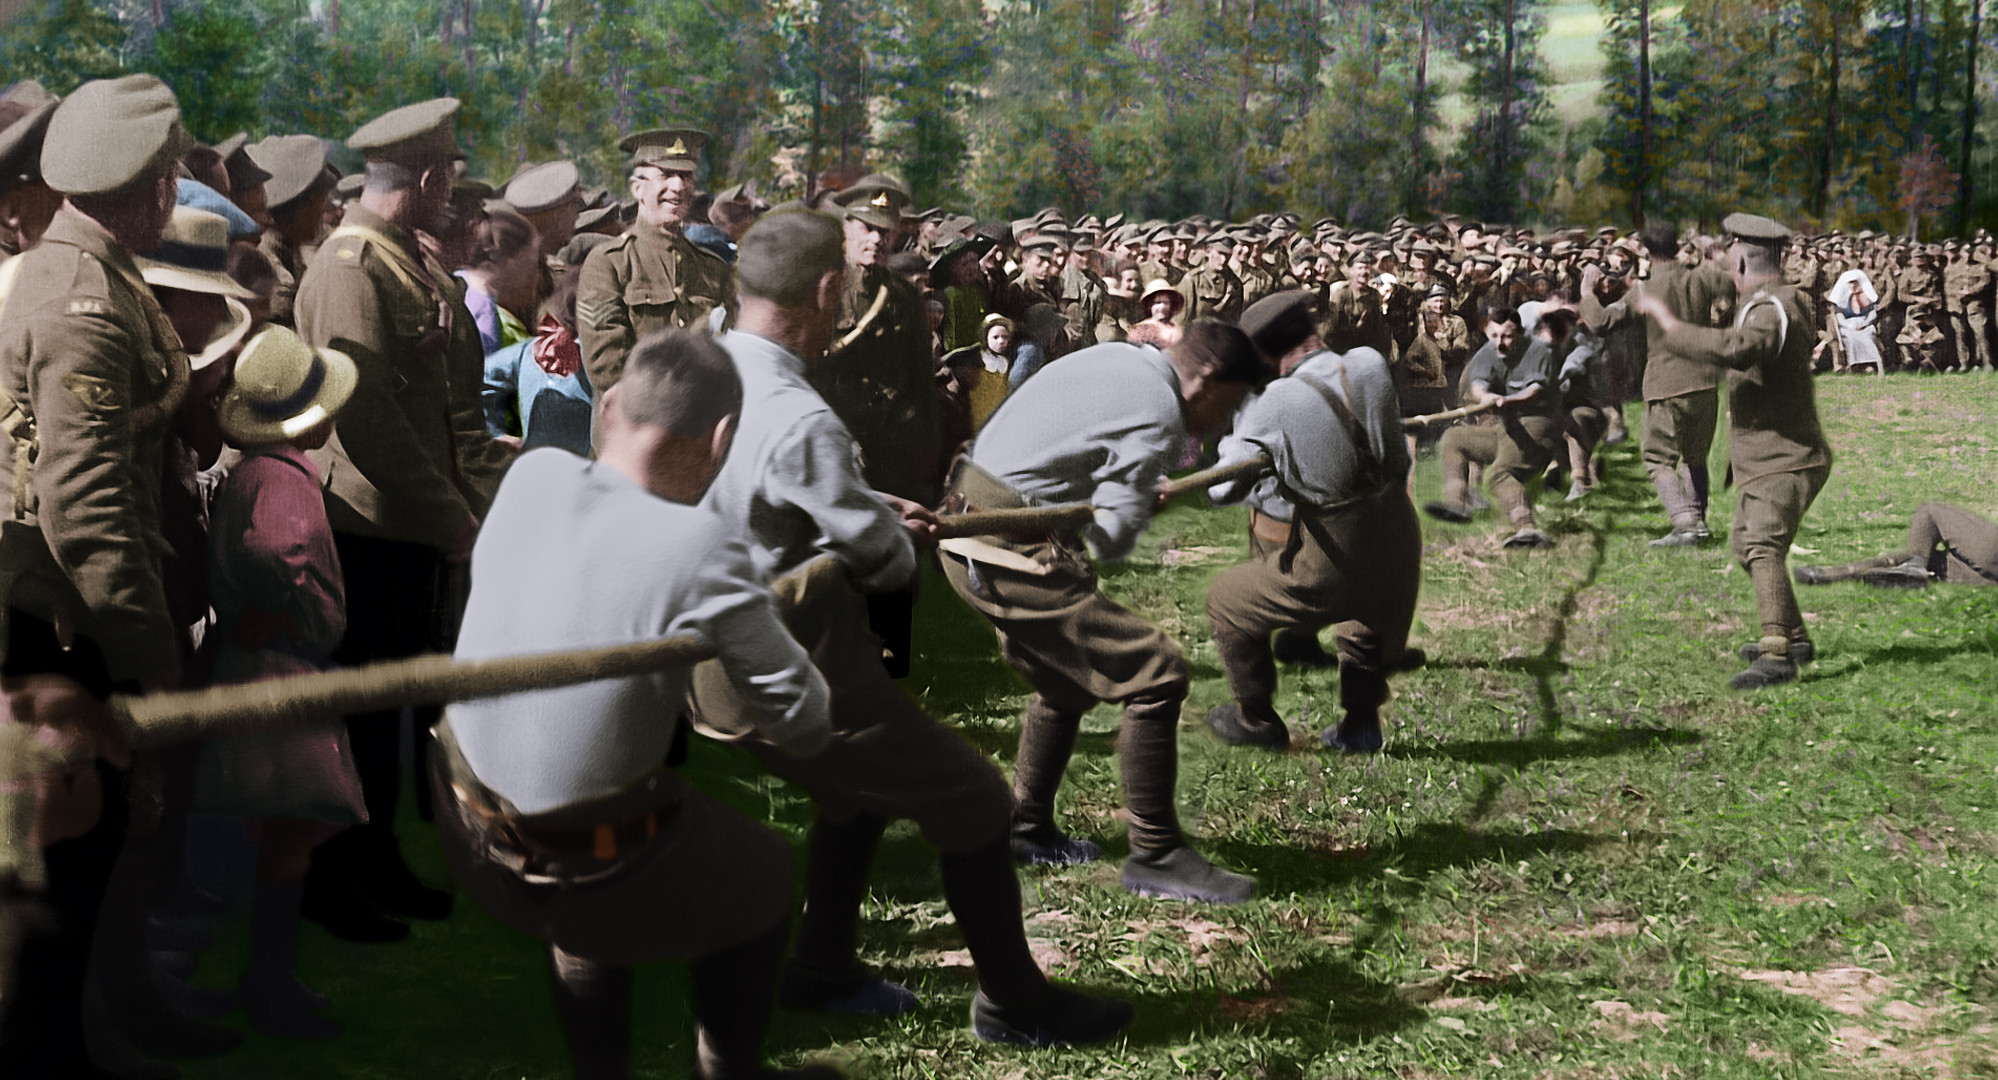 They Shall Not Grow Old: Scene Image 11